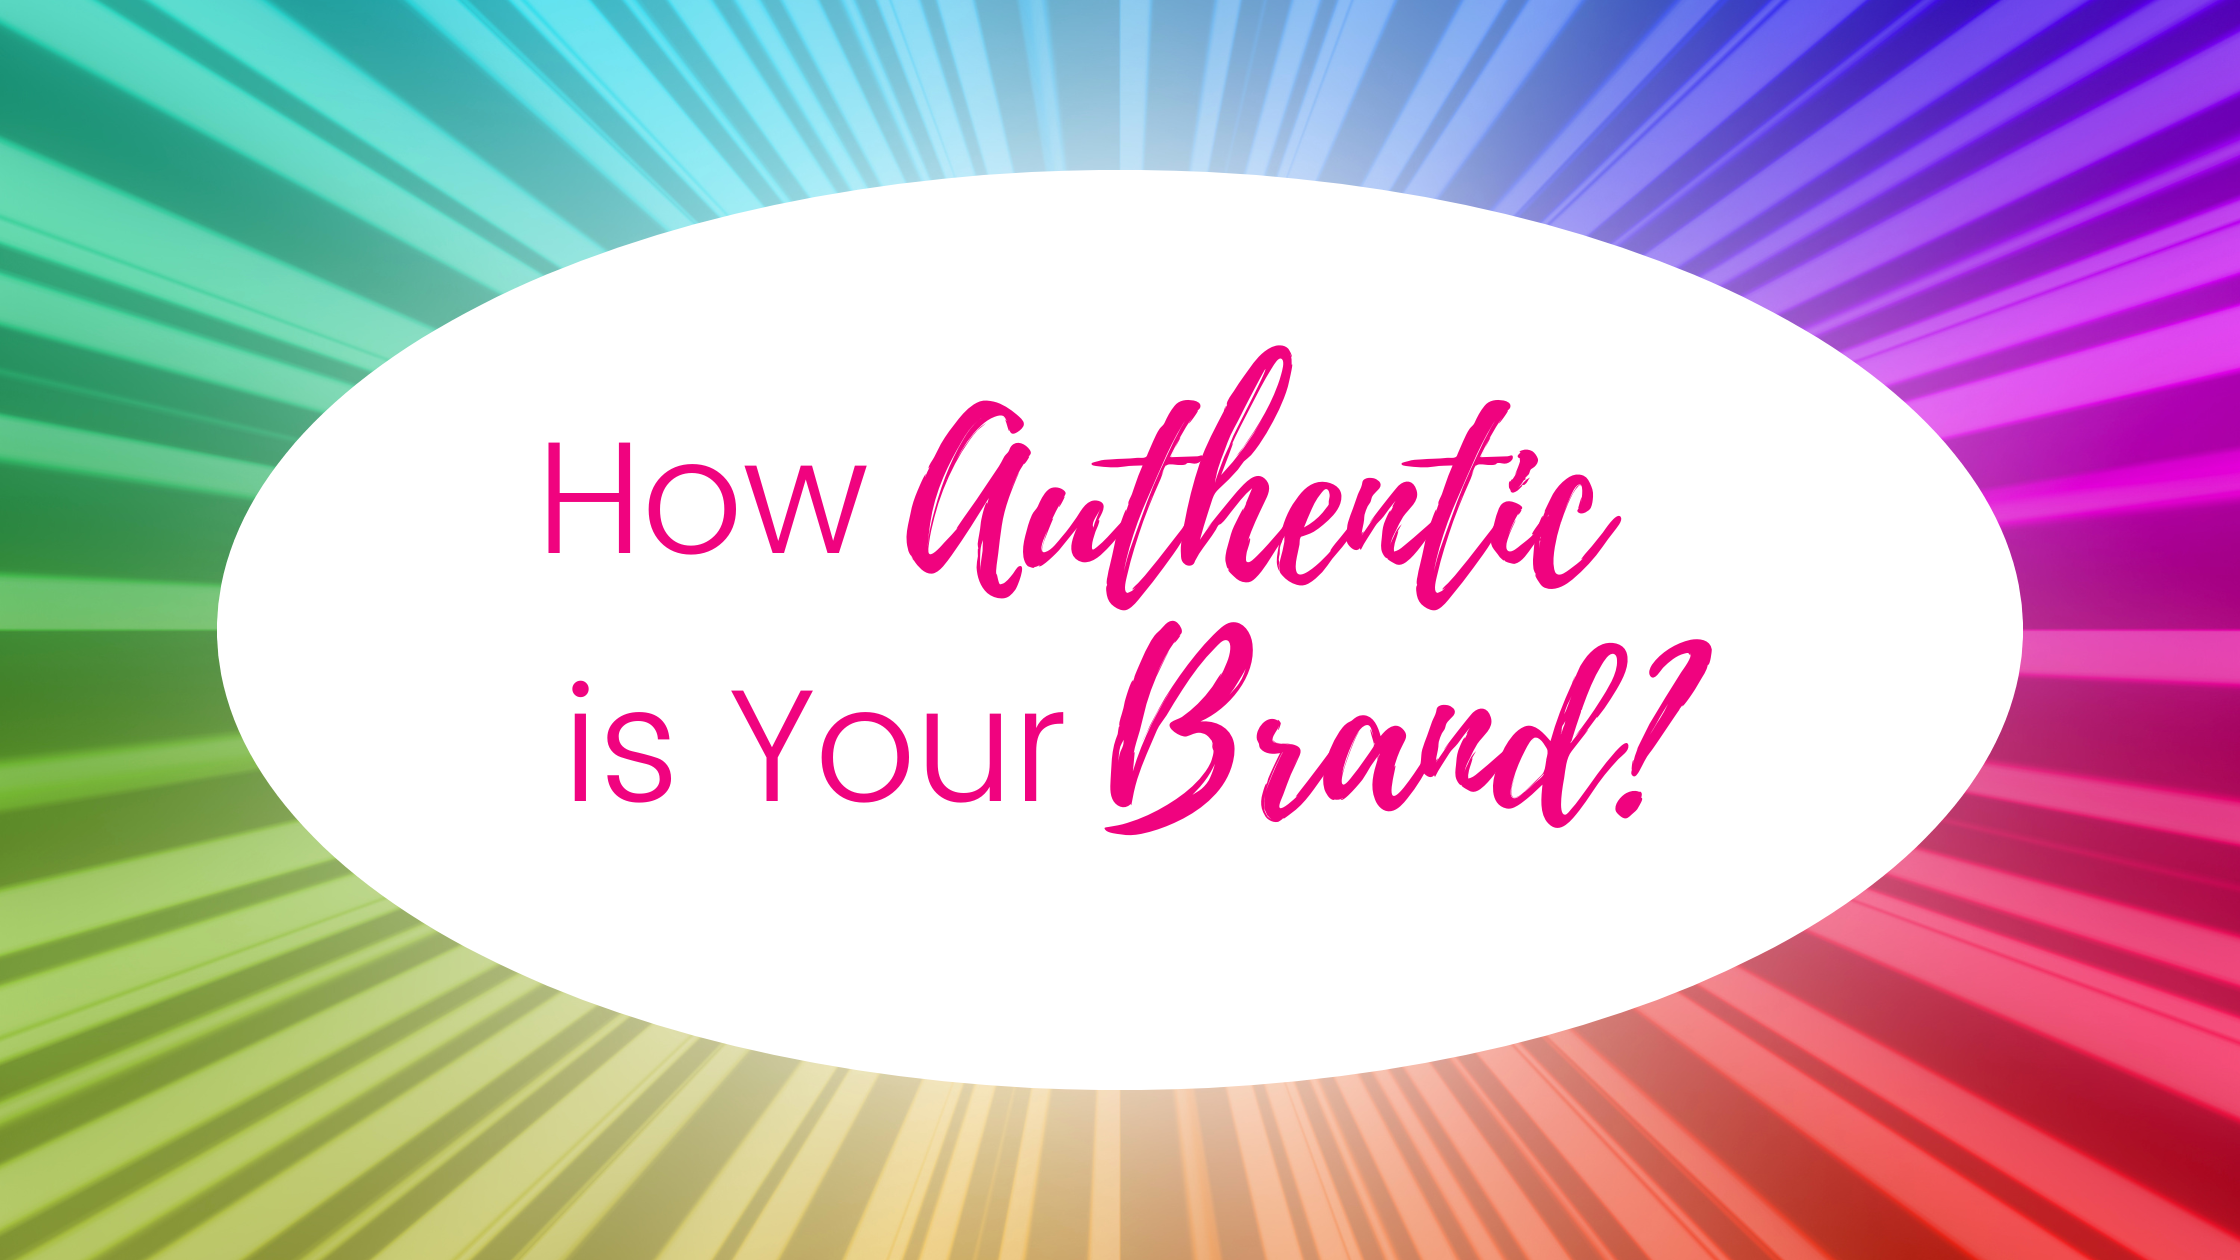 The What, Why, and How of Building Brand Authenticity